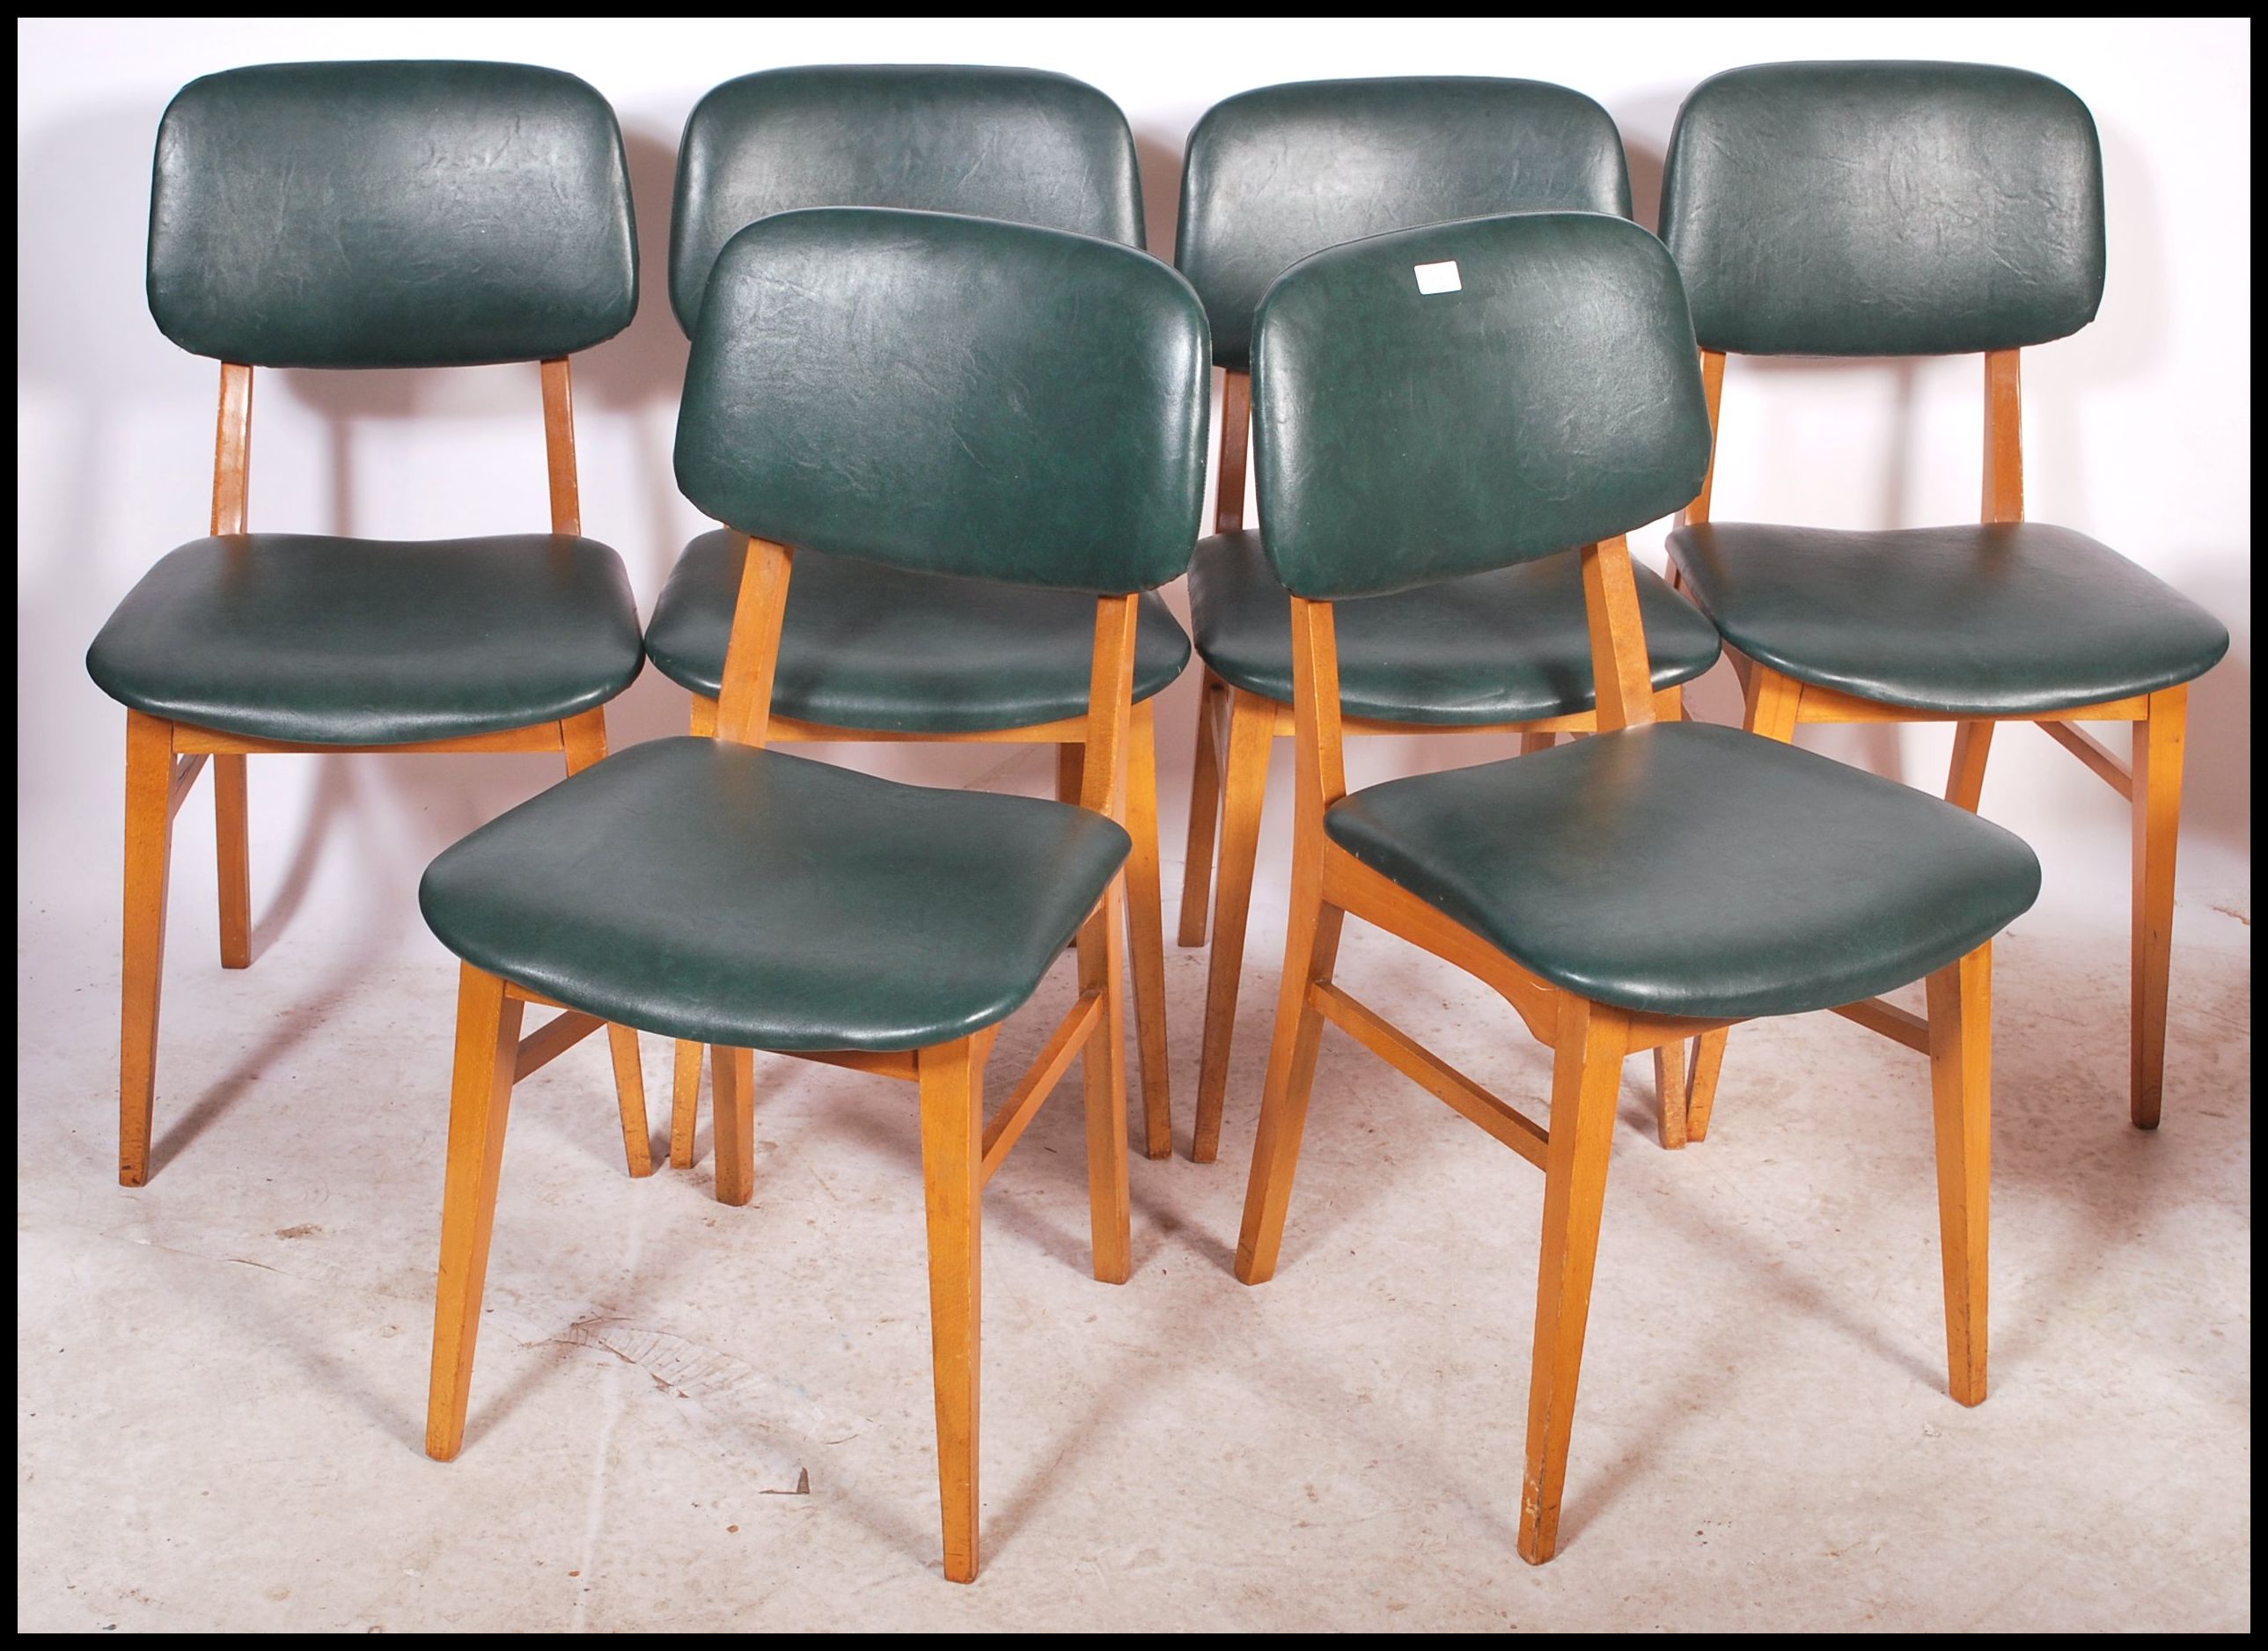 A set of 14 retro dinette utility style dining chairs / cafe chairs each with green padded seats and - Image 3 of 4